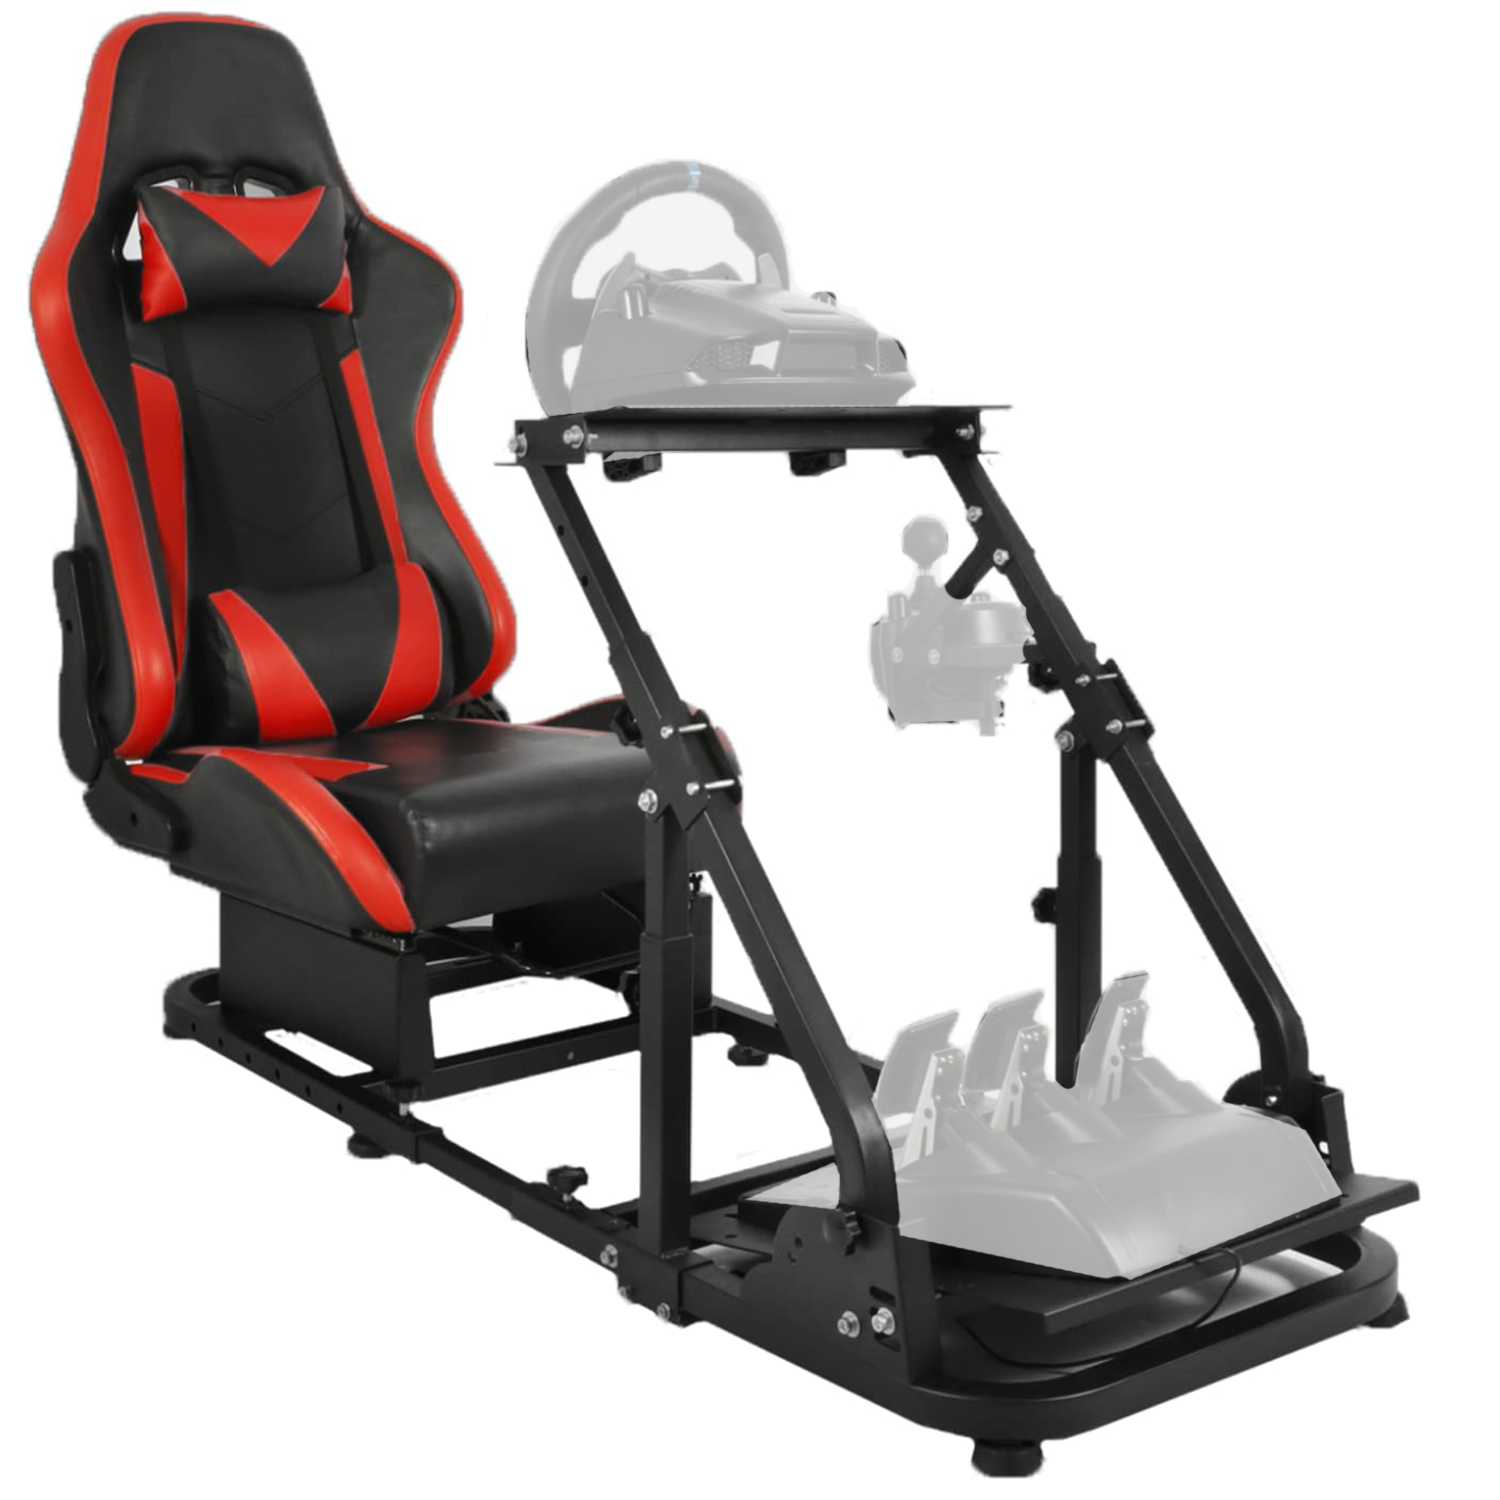 Minneer Stable Racing Simulator Cockpit with Seat Fit Logitech Thrustmaster